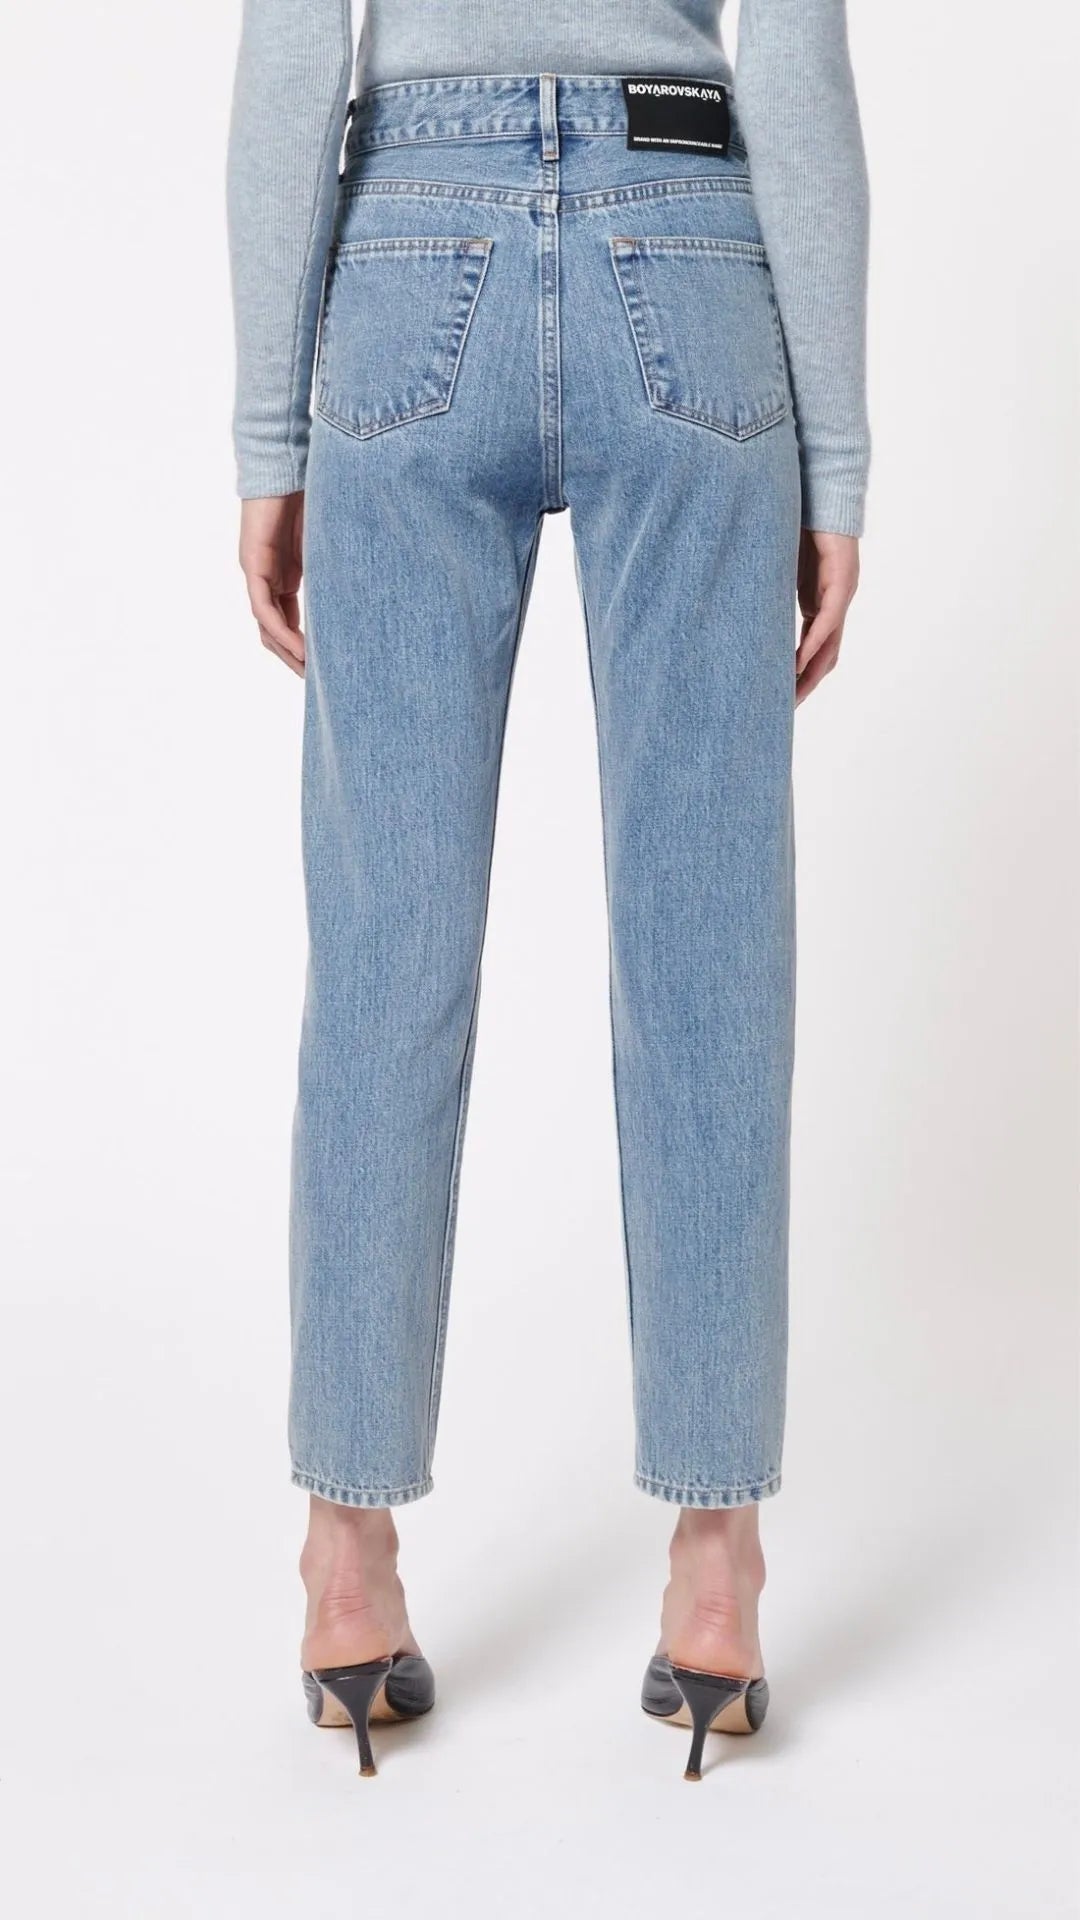 Boyarovskaya Slim Ring Jean. Light color stone denim with a slightly tapered leg and falls to just above the ankle. Zipper closure with silver ring detail on the front right. Product shown on model facing back.